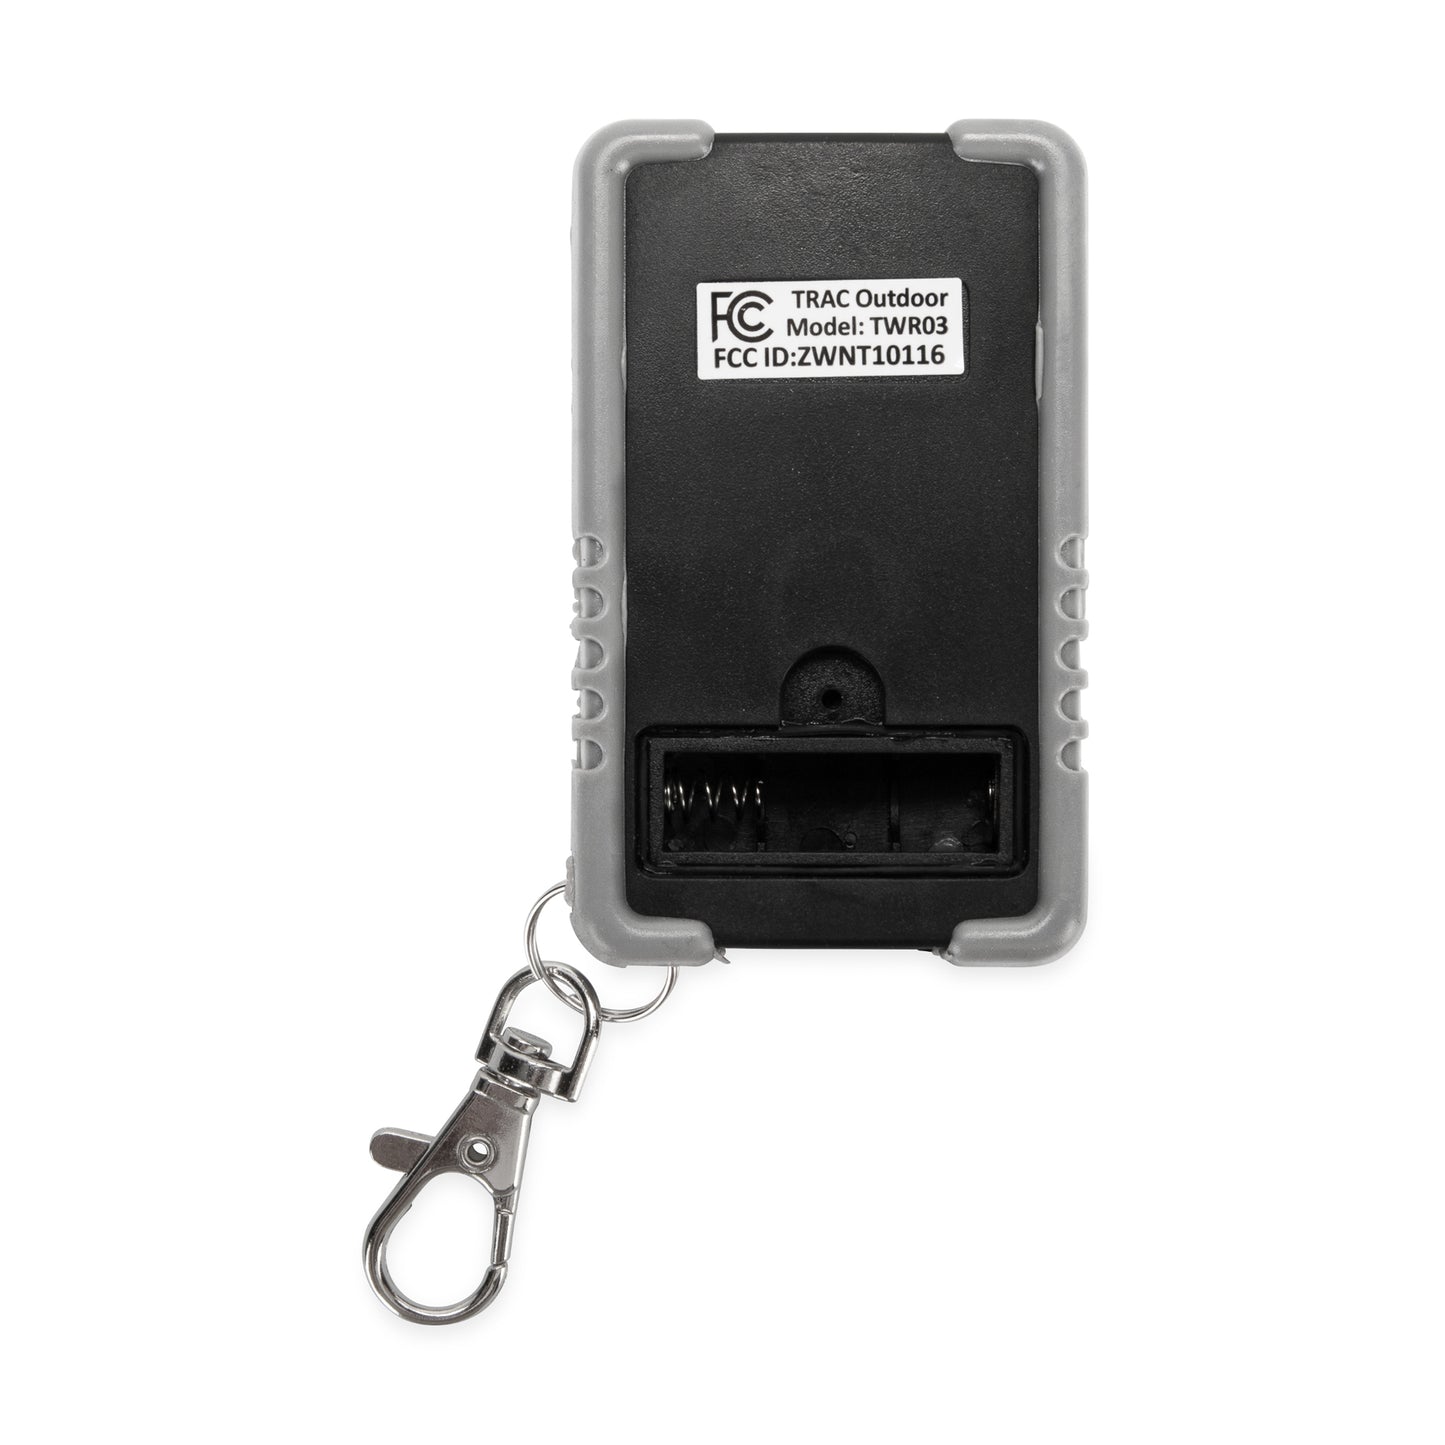 TRAC Outdoors G3 Wireless Remote Unit